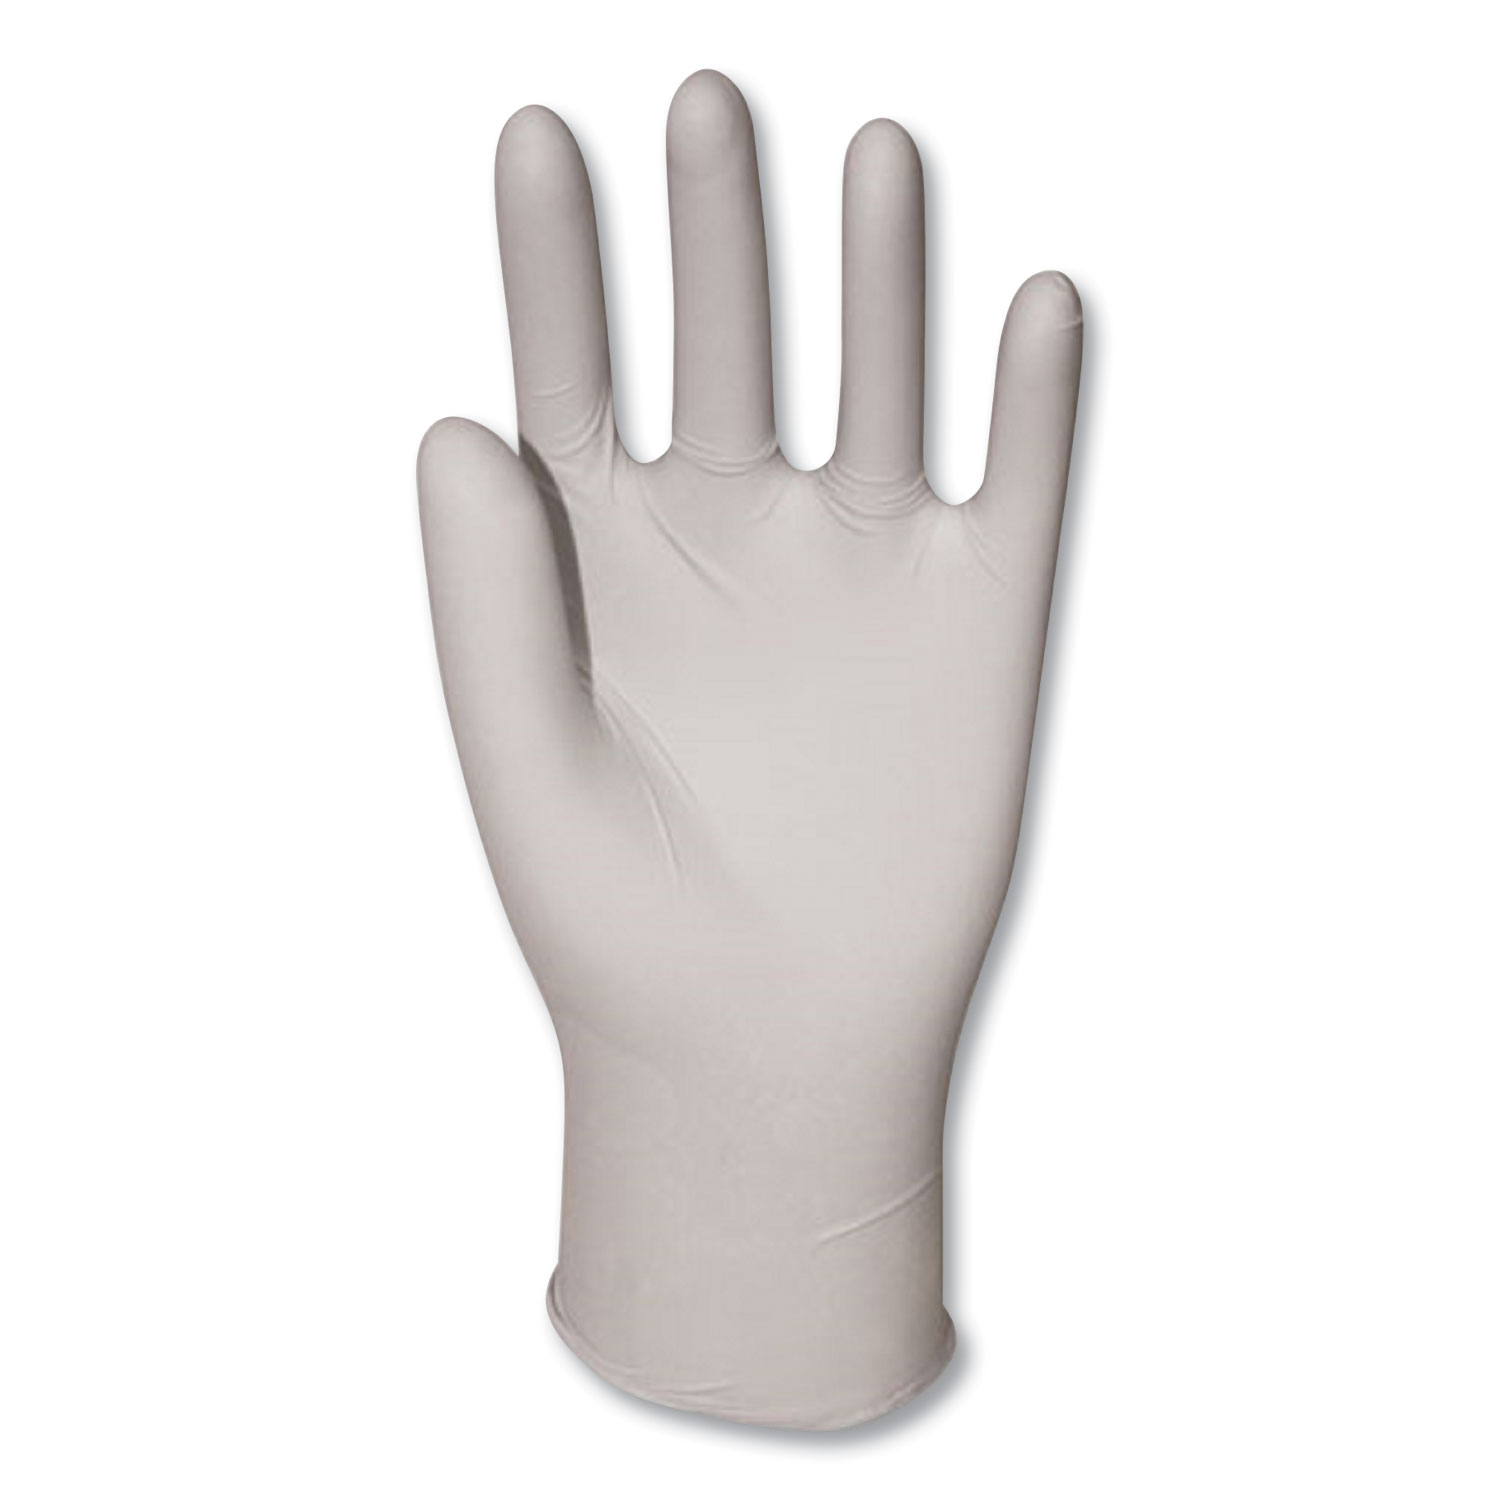  GN1 8961LCT General Purpose Powder-Free Vinyl Gloves, Large, Clear, 1,000/Carton (GN18961LCT) 